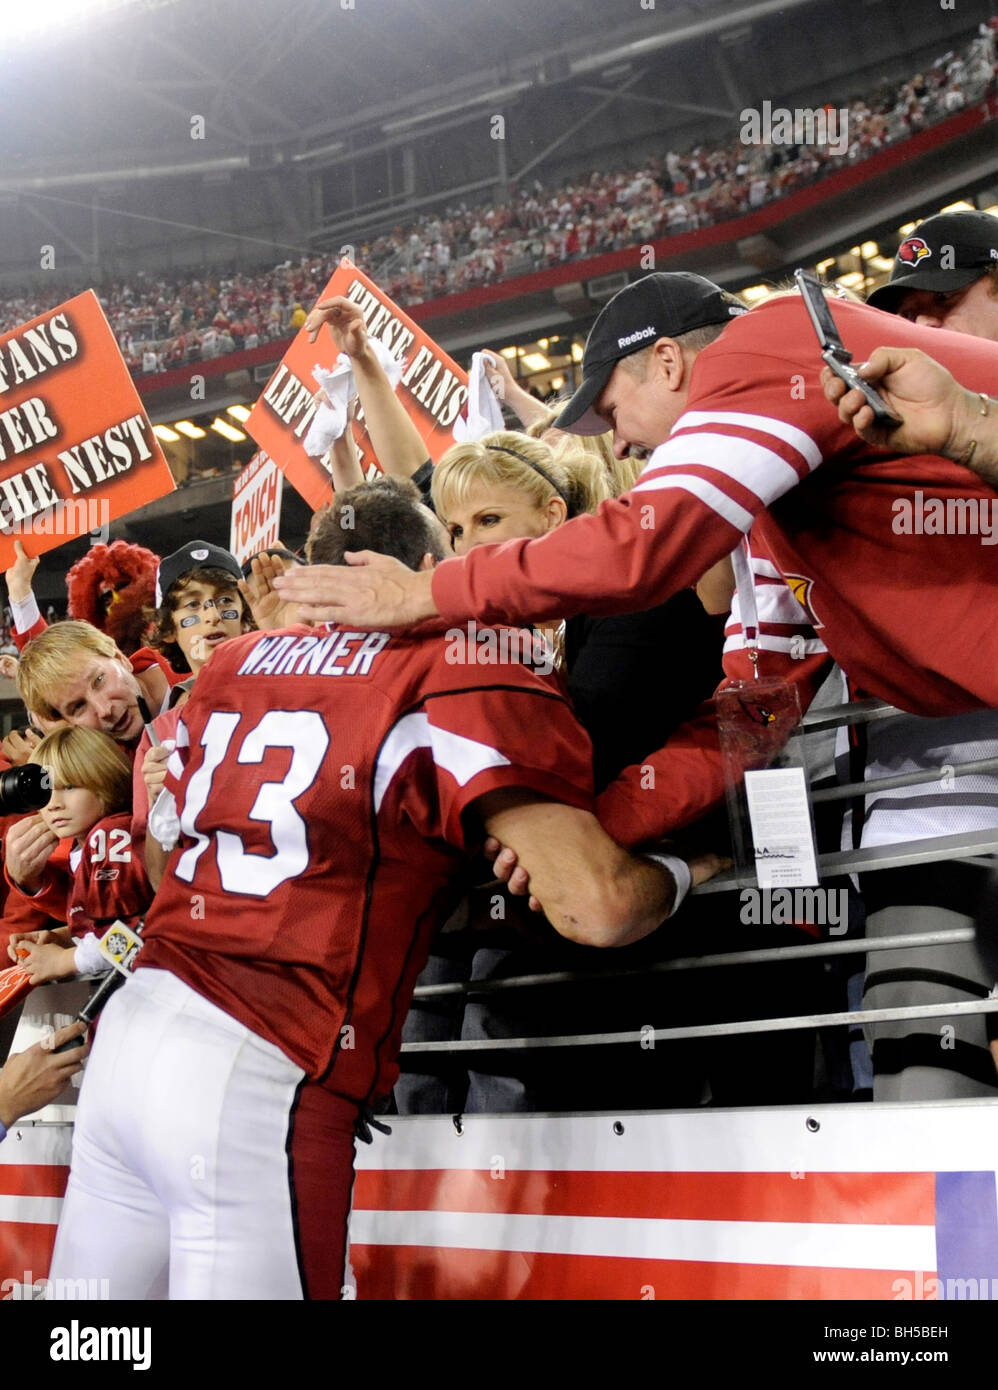 Kurt Warner #13 of the Arizona Cardinals kisses his wife after defeating the Green Bay Packers in the NFC wild-card playoff game Stock Photo